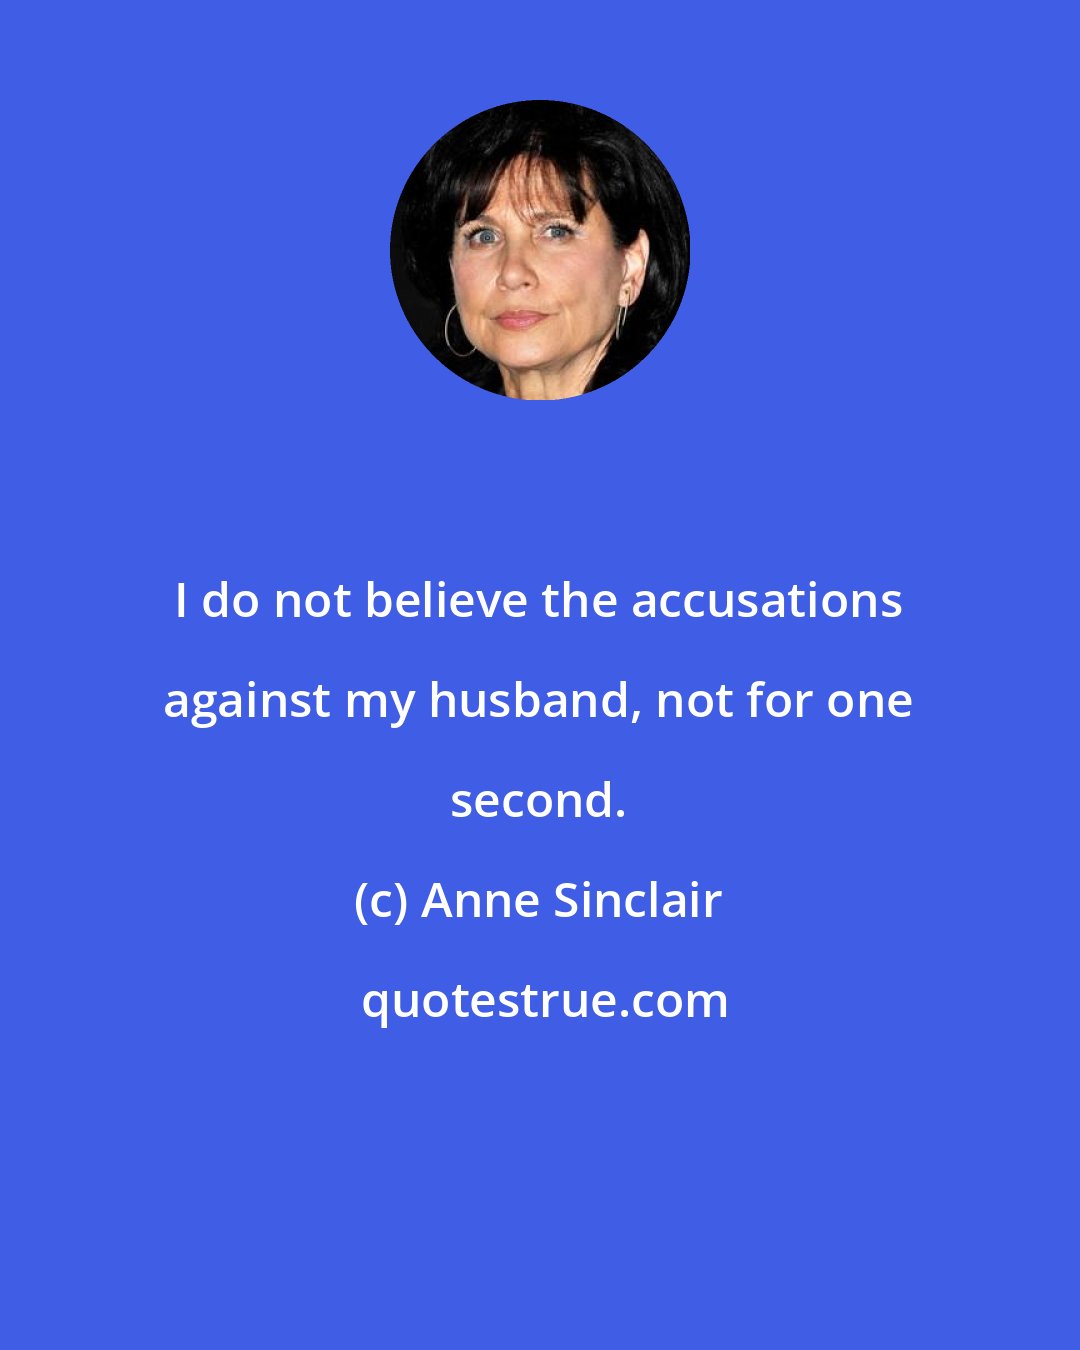 Anne Sinclair: I do not believe the accusations against my husband, not for one second.